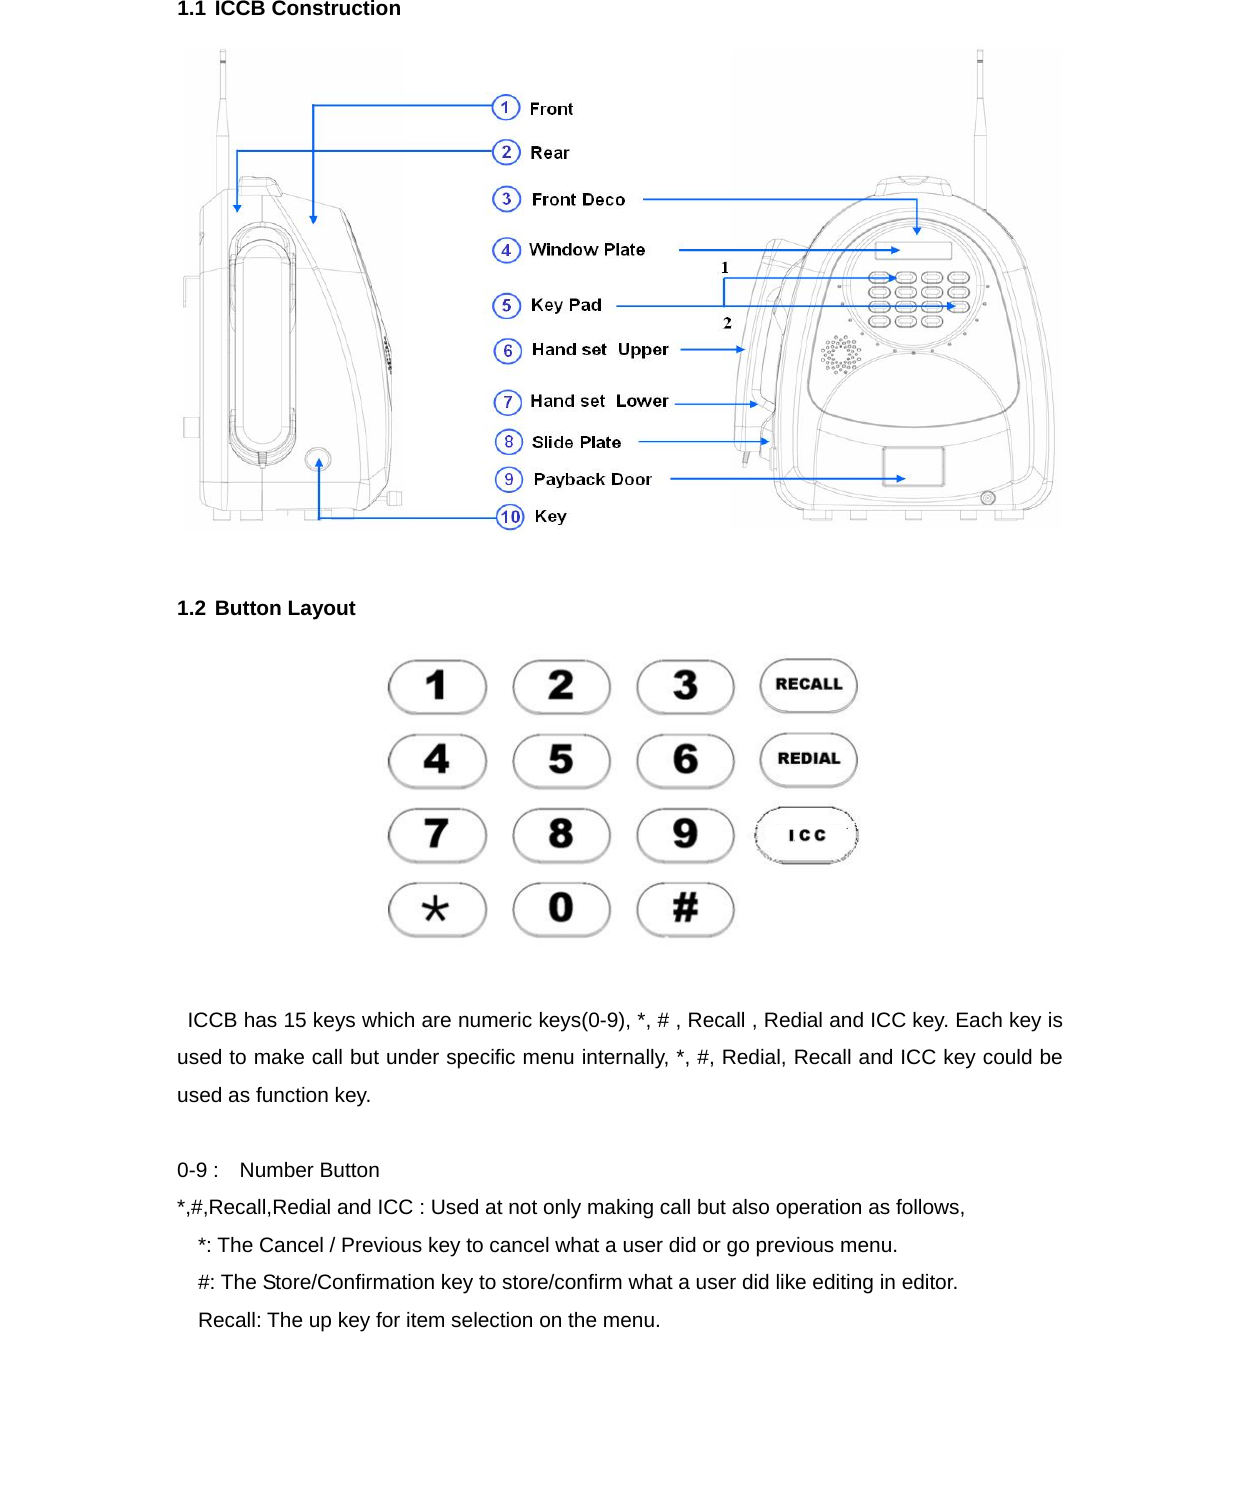 1.1 ICCB Construction   1.2 Button Layout   ICCB has 15 keys which are numeric keys(0-9), *, # , Recall , Redial and ICC key. Each key is used to make call but under specific menu internally, *, #, Redial, Recall and ICC key could be used as function key.  0-9 :  Number Button *,#,Recall,Redial and ICC : Used at not only making call but also operation as follows, *: The Cancel / Previous key to cancel what a user did or go previous menu. #: The Store/Confirmation key to store/confirm what a user did like editing in editor. Recall: The up key for item selection on the menu. 